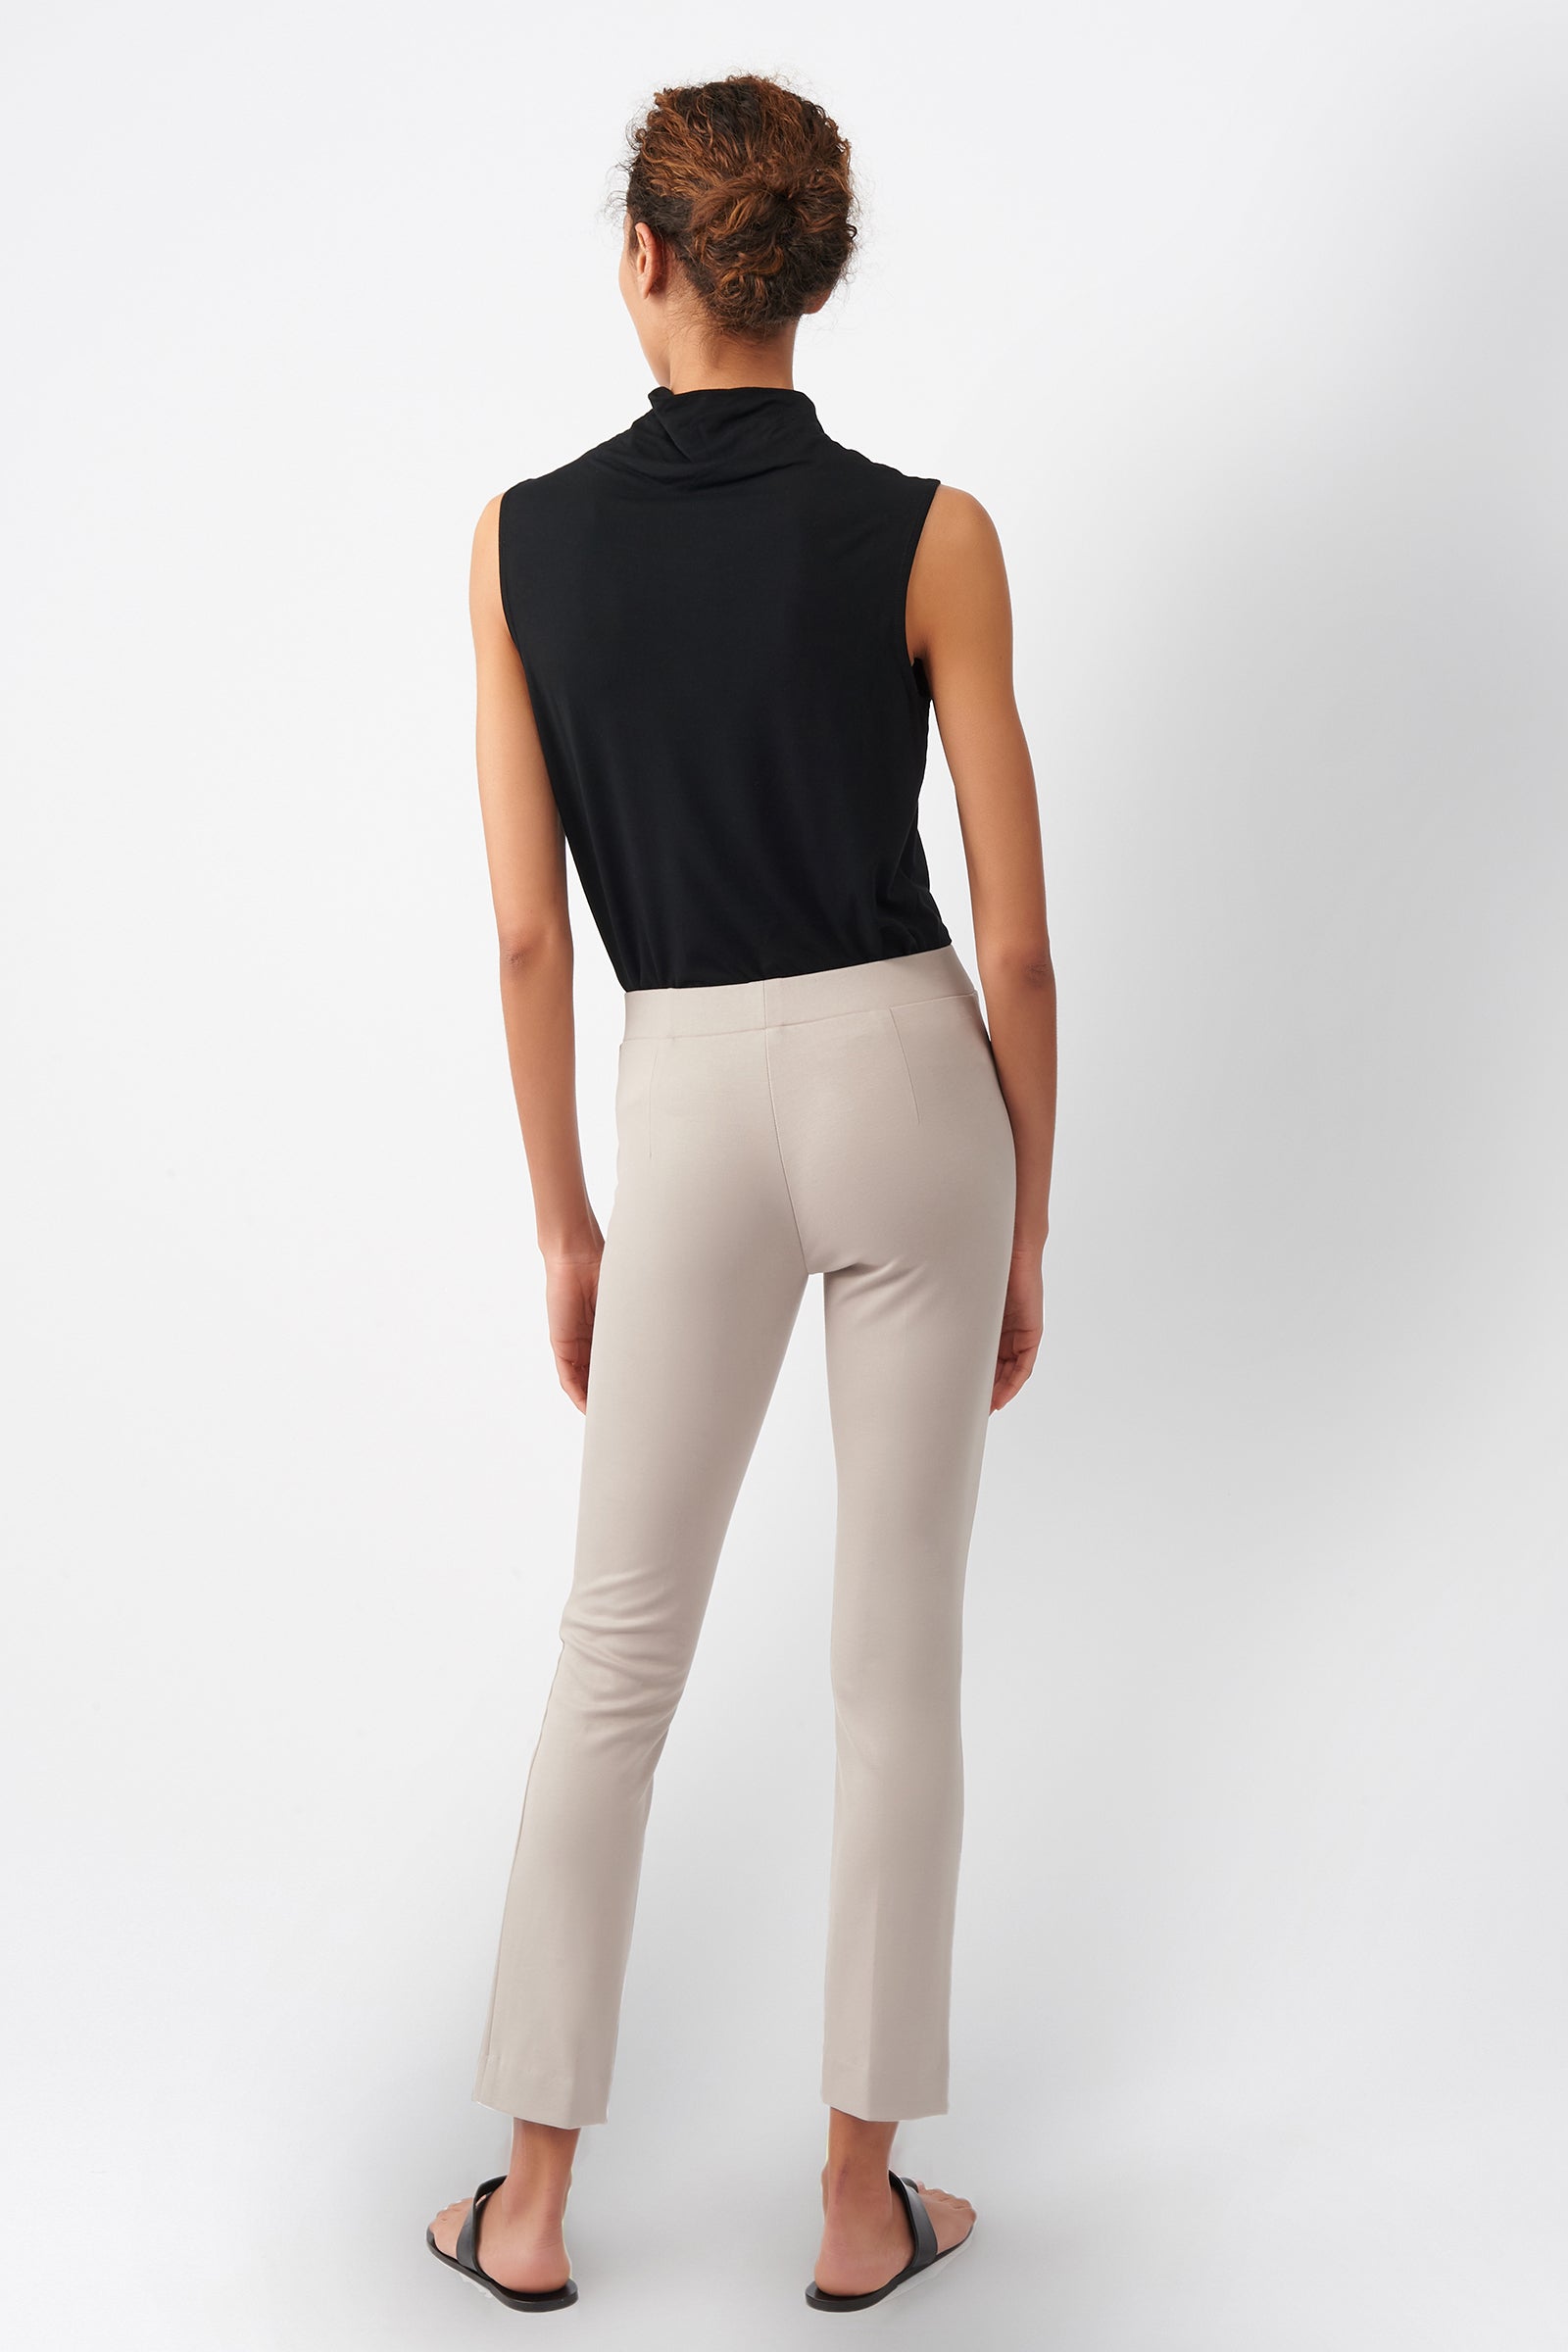 Kal Rieman Pintuck Ponte Ankle Pant in Taupe on Model Back View